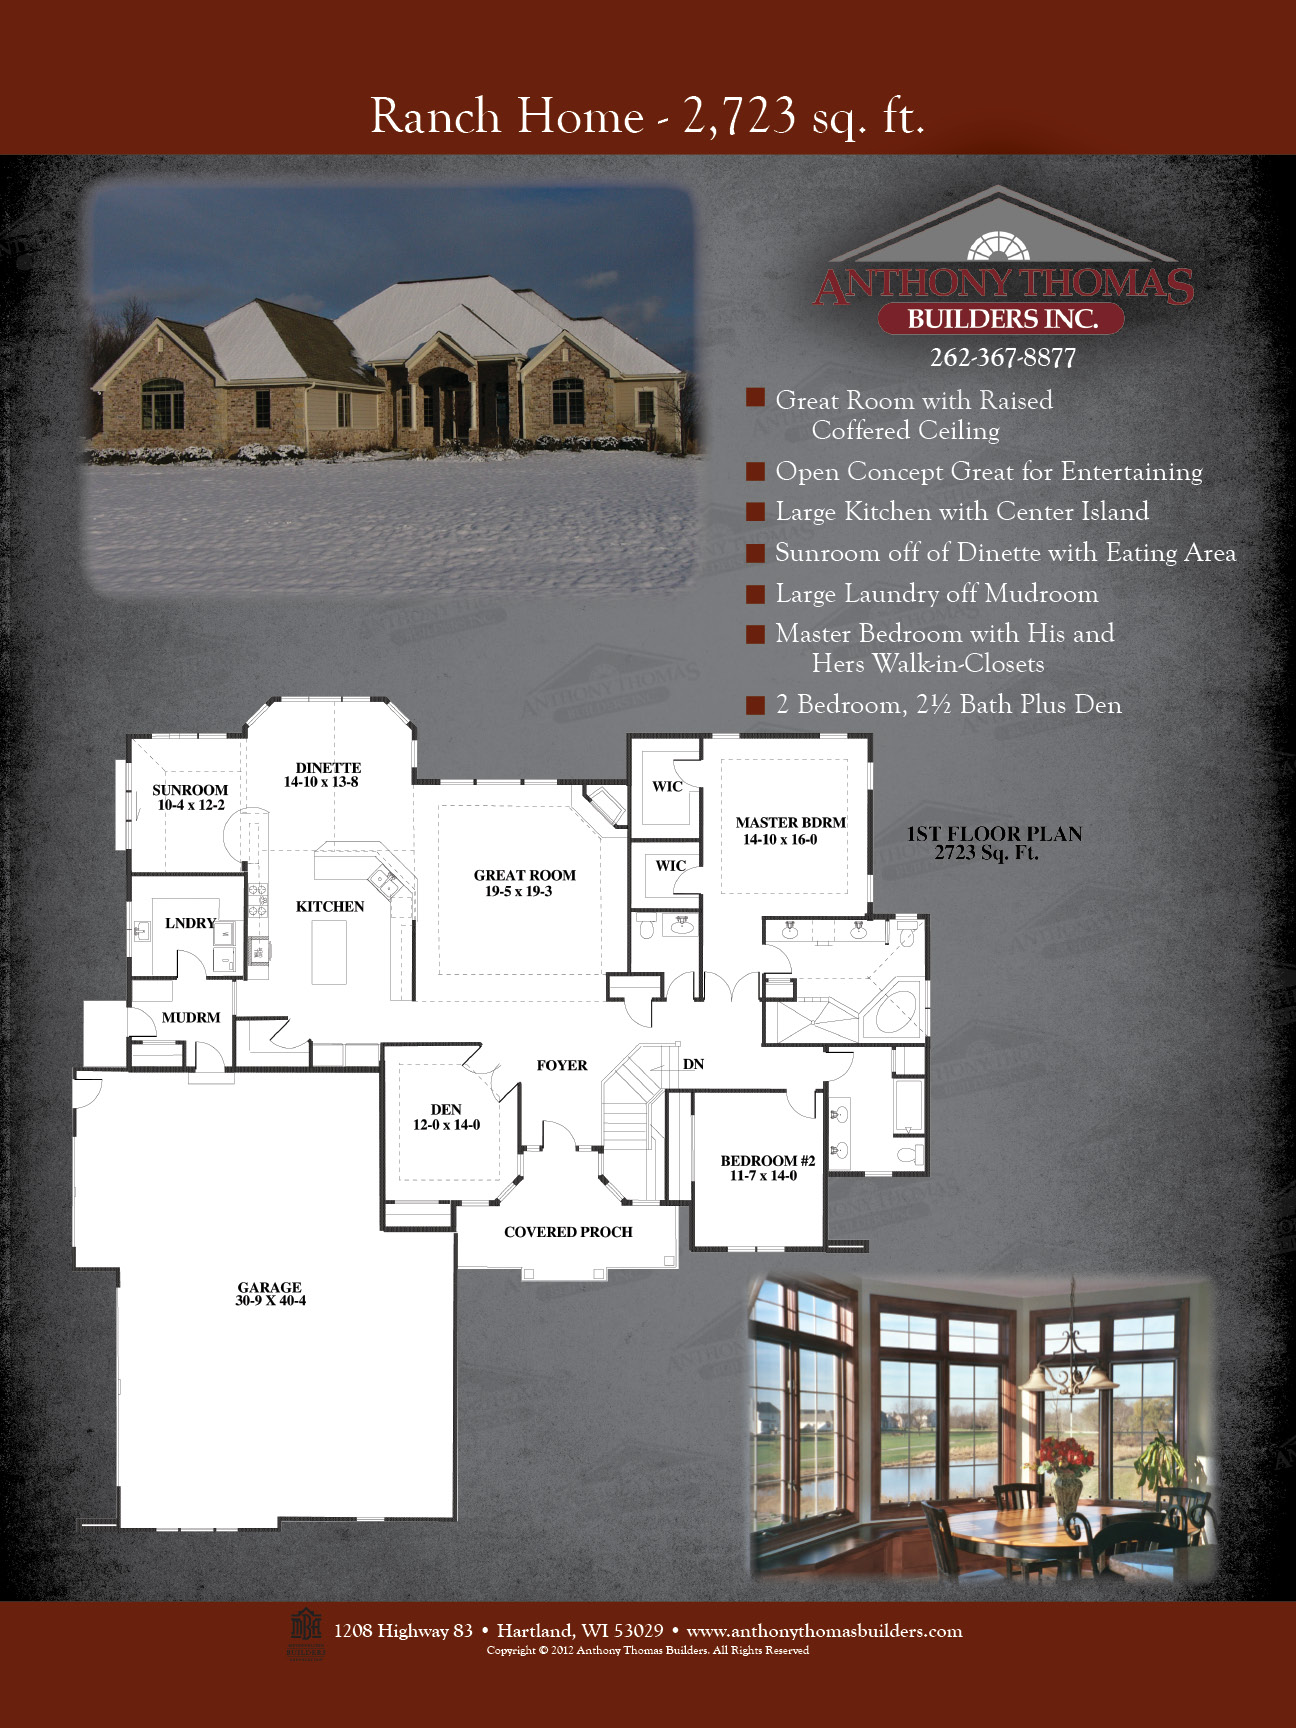 Anthony Thomas Builders Home Plans